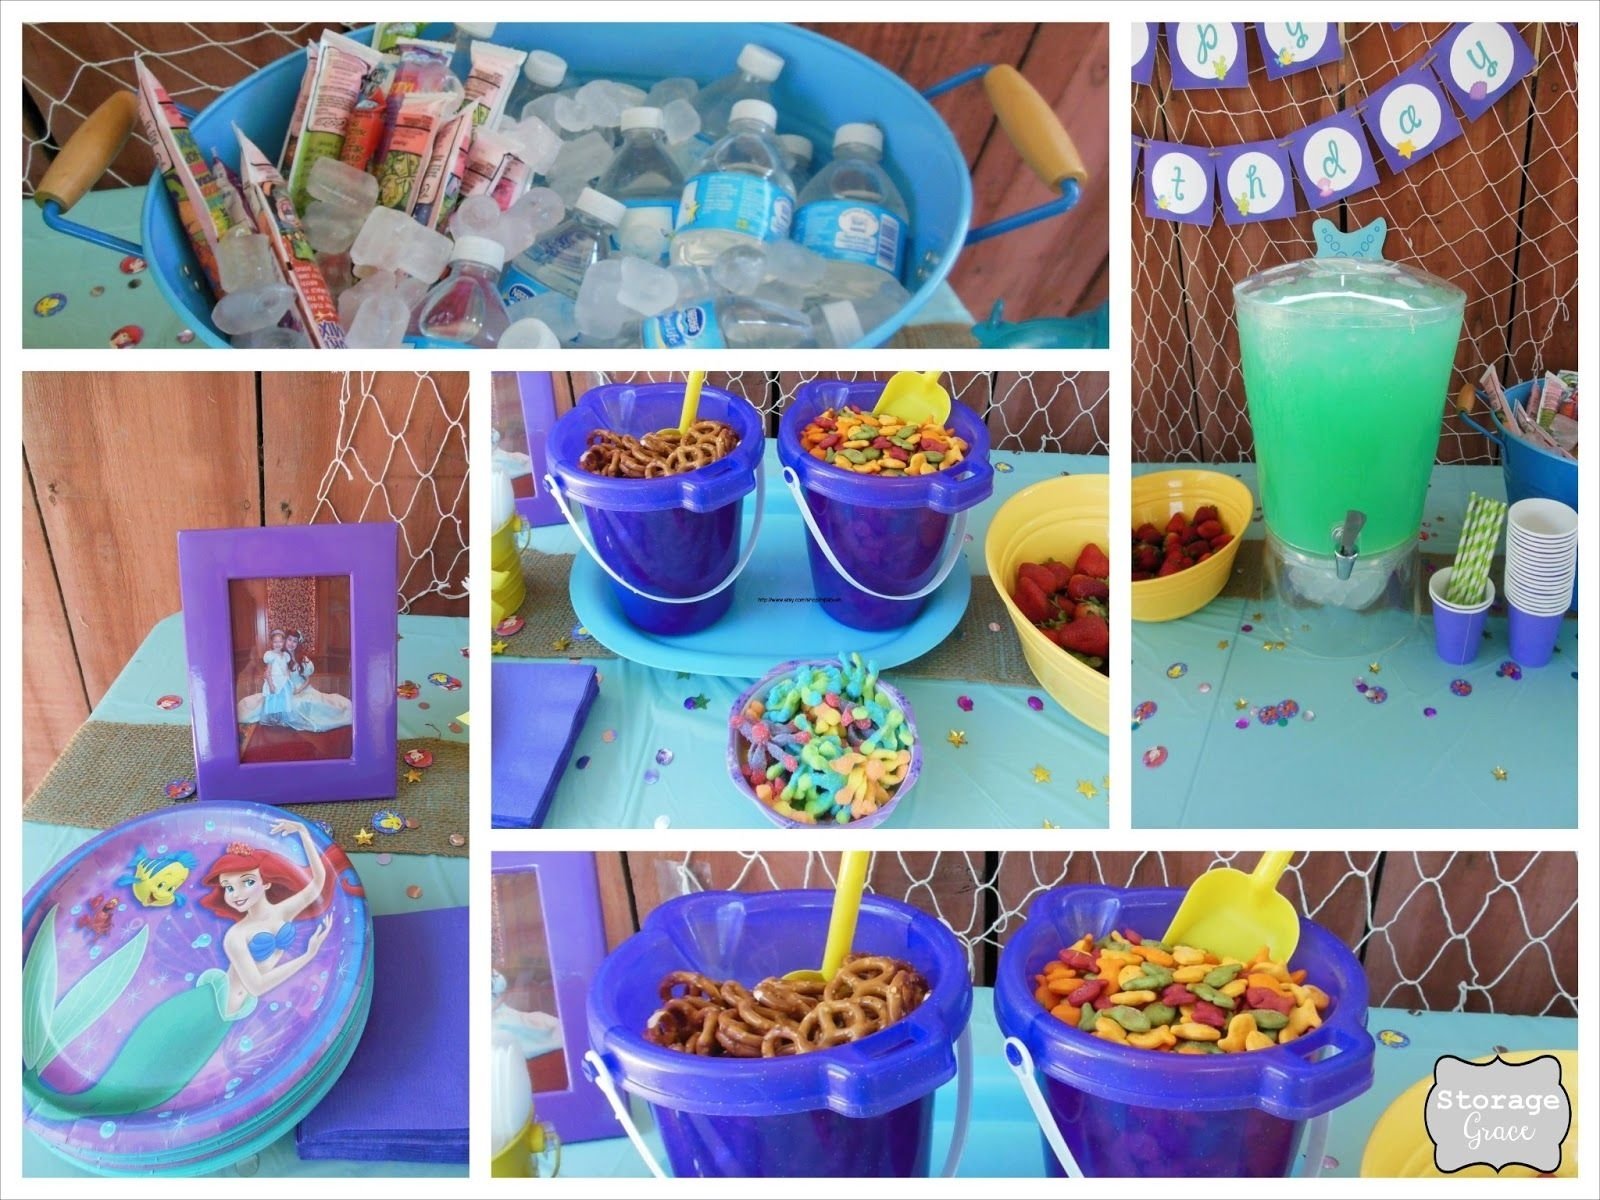 10 Most Recommended The Little Mermaid Party Ideas ariel party ideas google search birthday ideas pinterest 1 2022